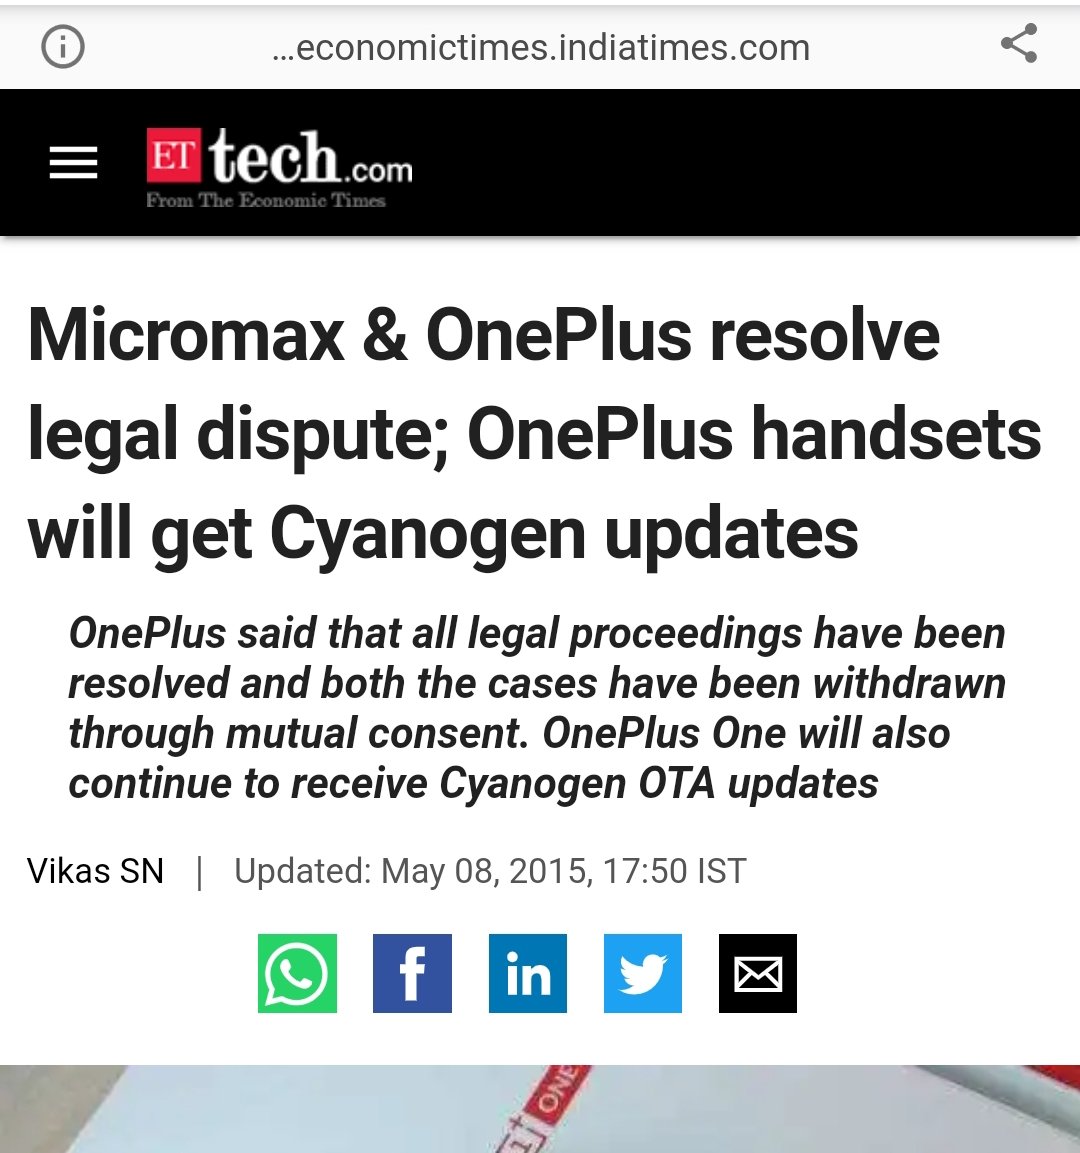 21. An interesting fact is that Micromax had grown so big it even stopped OnePlus from selling it's phone with Cyanogen in India. Micromax had incurred major expenses in creating 'Cyanogen OS brand exclusivity' in Indian market. This is where Oxygen OS takes its birth.